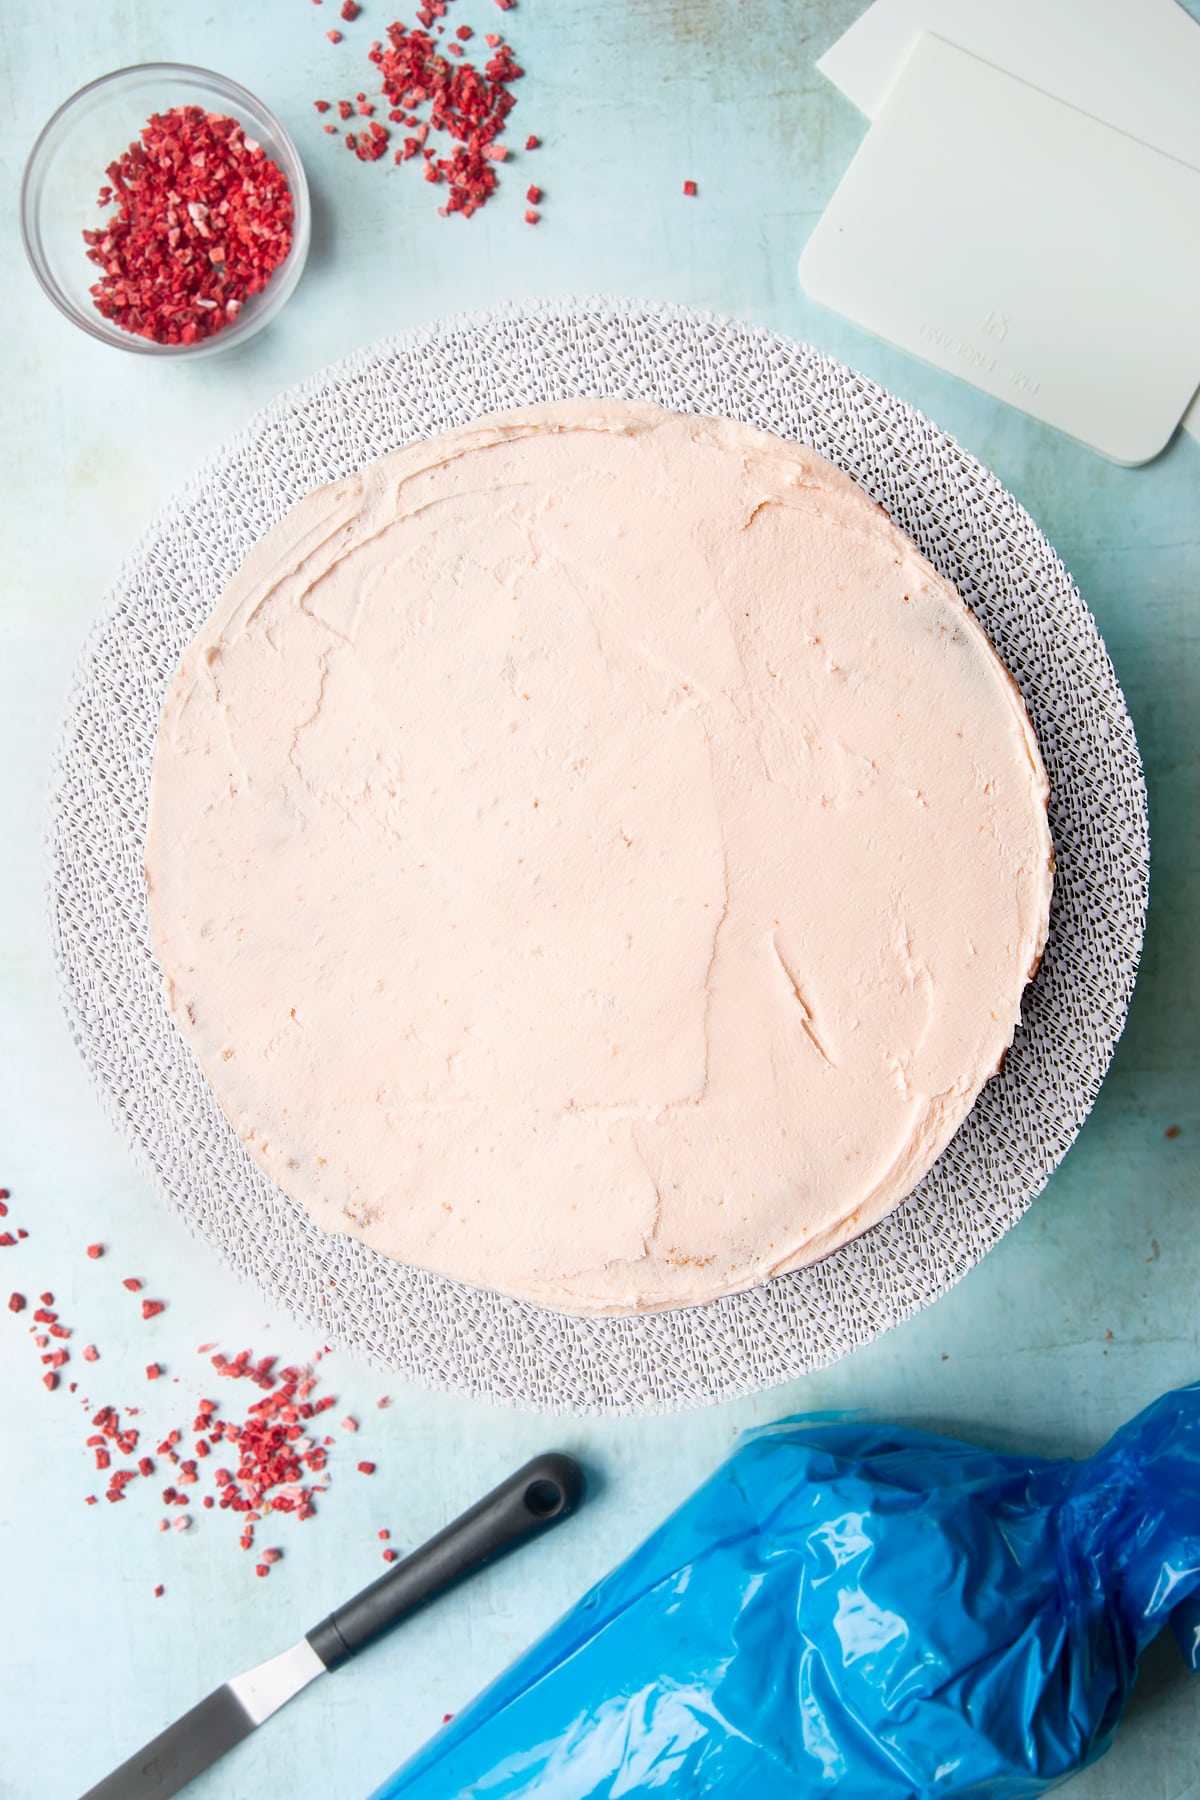 The three layers of a pink ombre cake from brightest to palest pink, stacked on a cake turntable. Pale pink frosting is sandwiched between the layers and coats the outside of the cake.